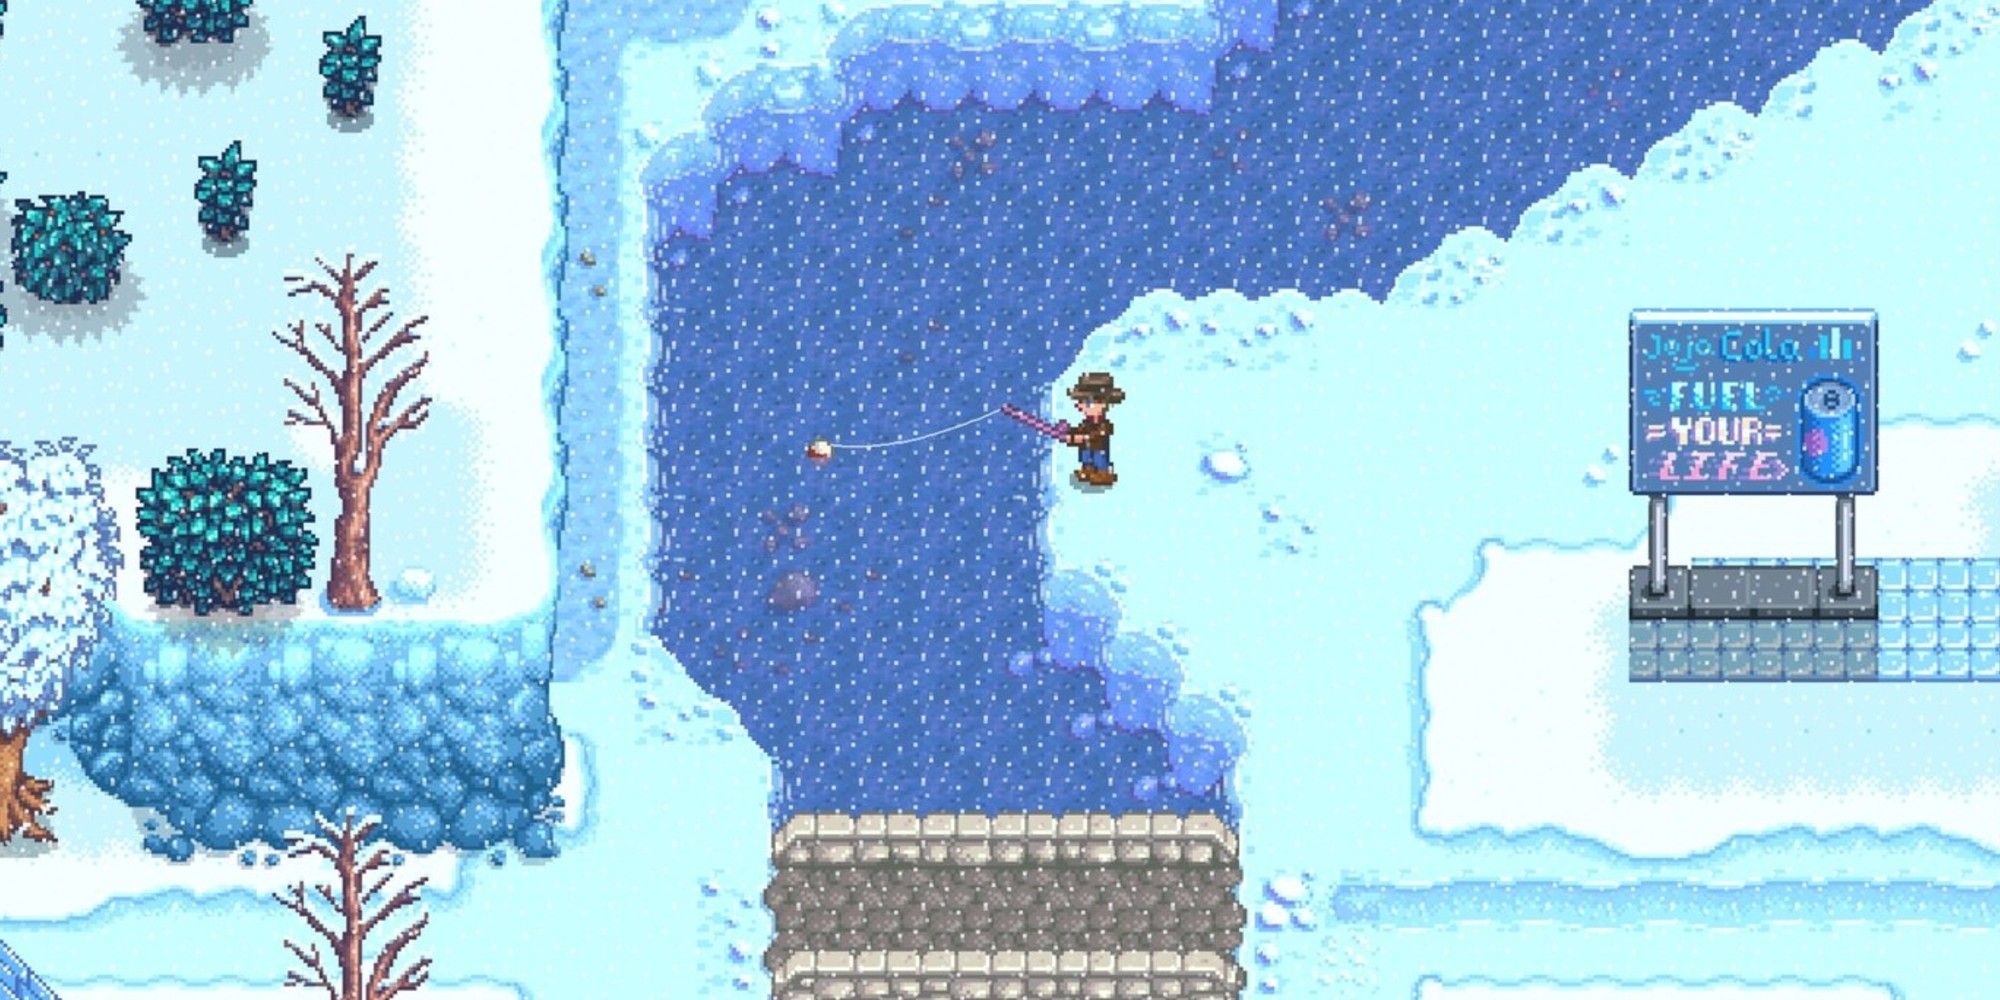 player fishing in town river during the winter